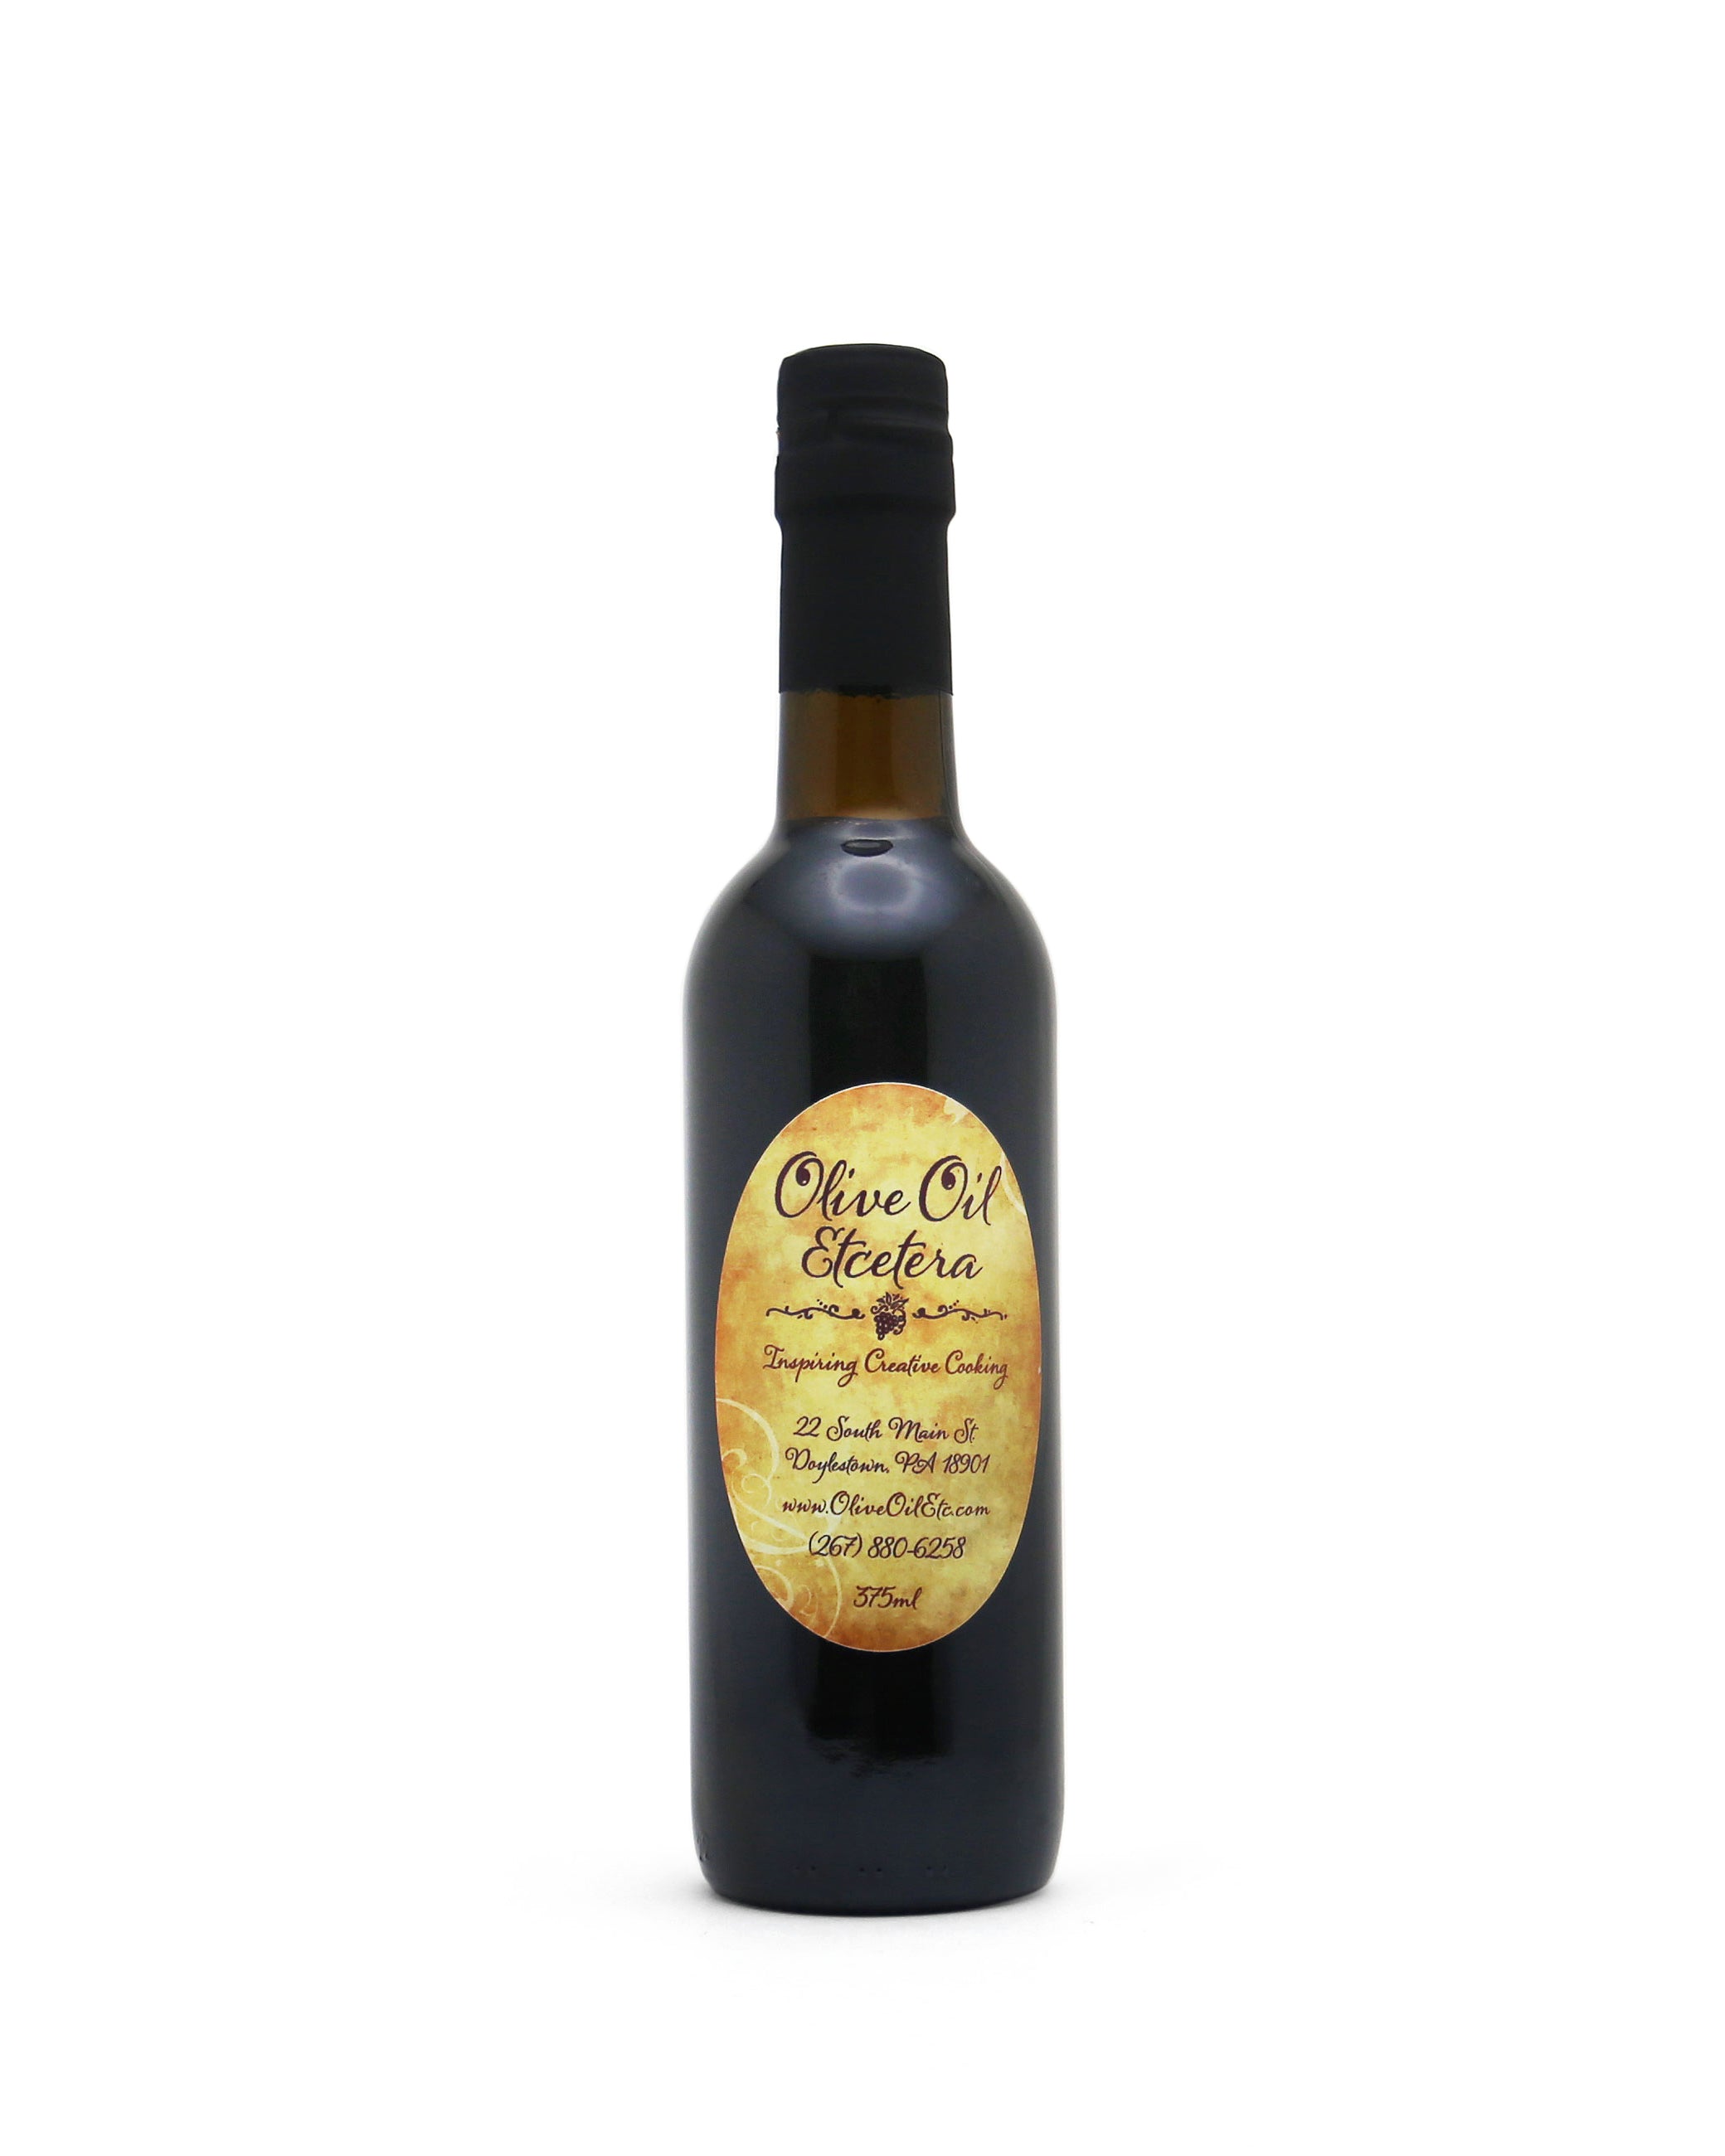 Fruity/Smooth Extra Virgin Olive Oil - Olive Oil Etcetera - Bucks county's gourmet olive oil and vinegar shop